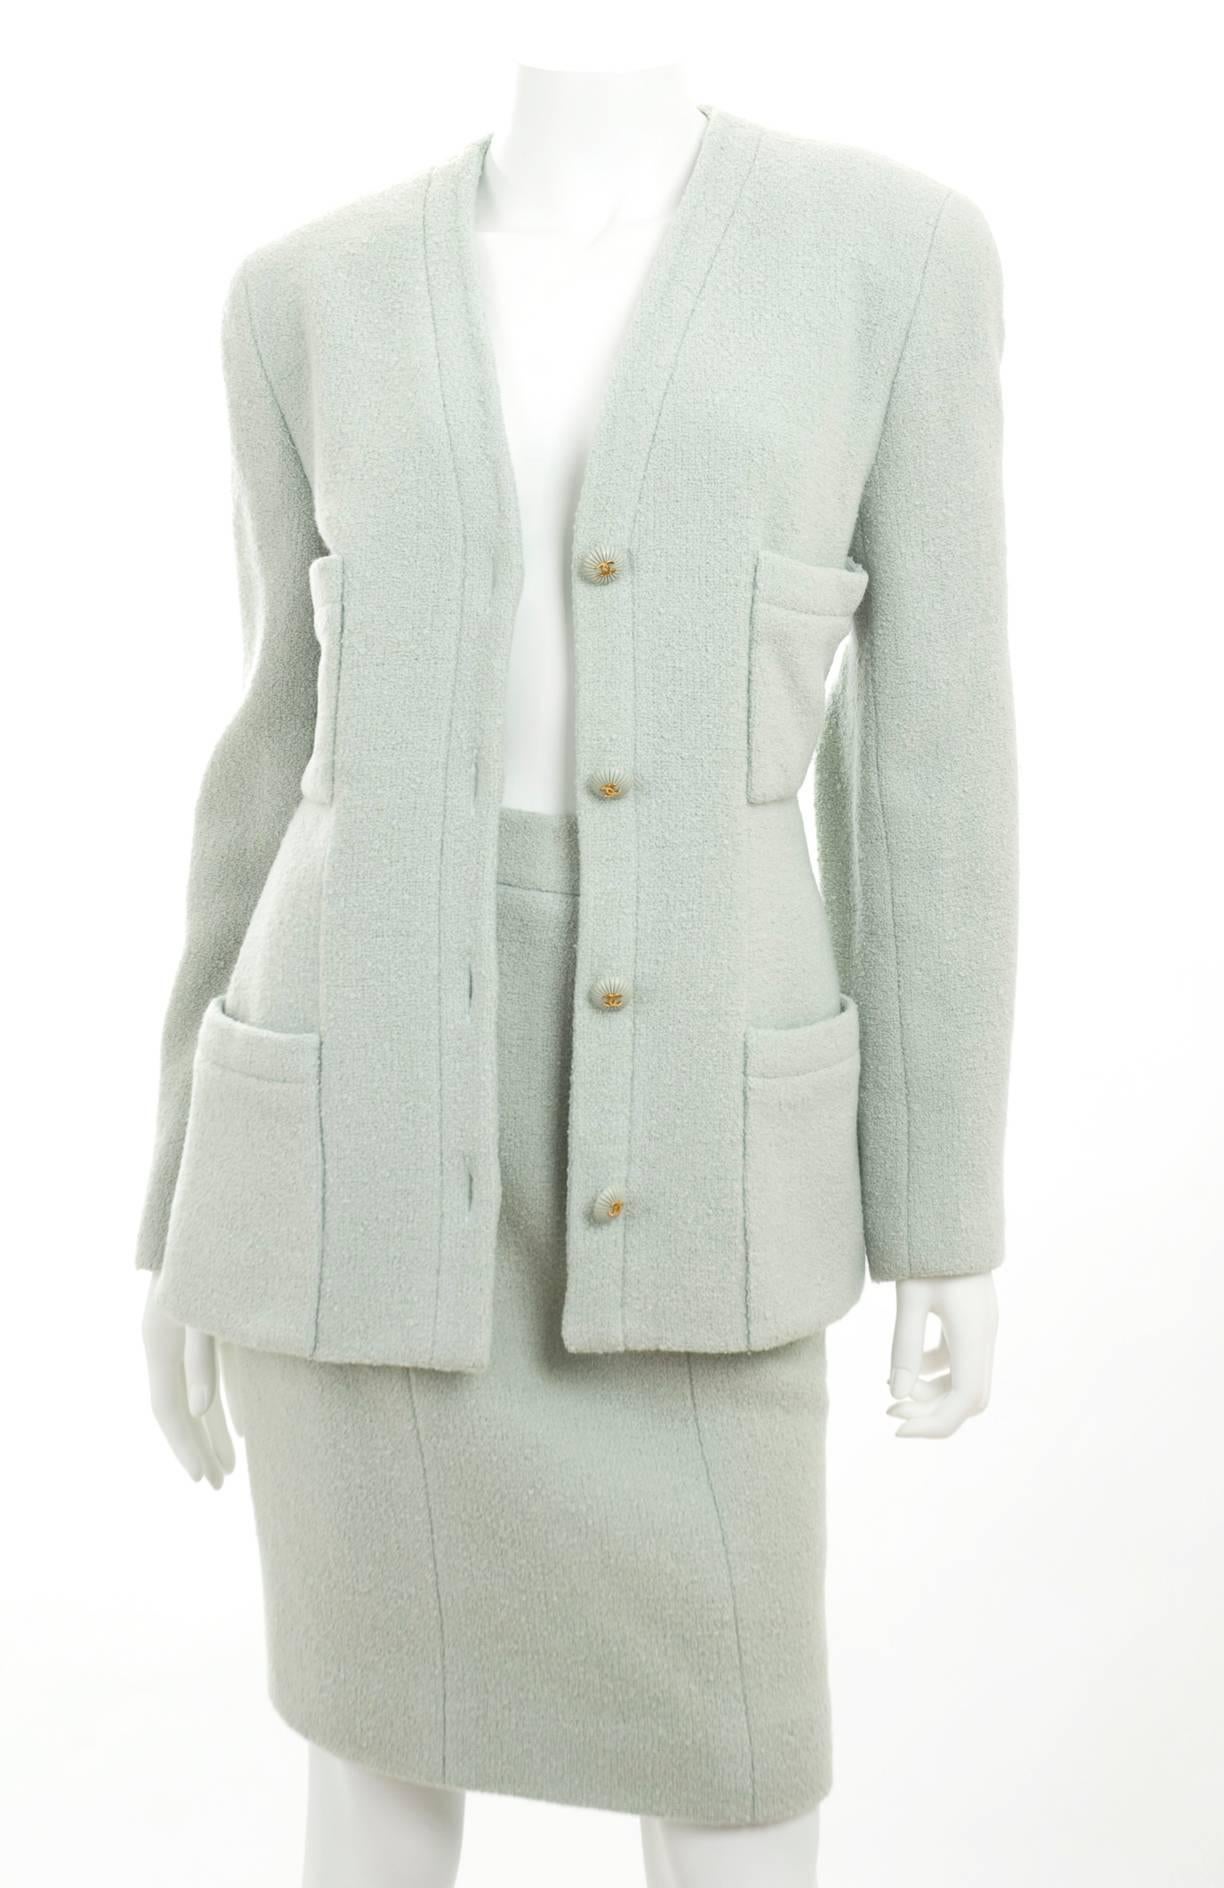 1993 Chanel Boucle Suit in Mint Green.
Silk lining.
Size 42 EU
Measurements:
Jacket length 26.5